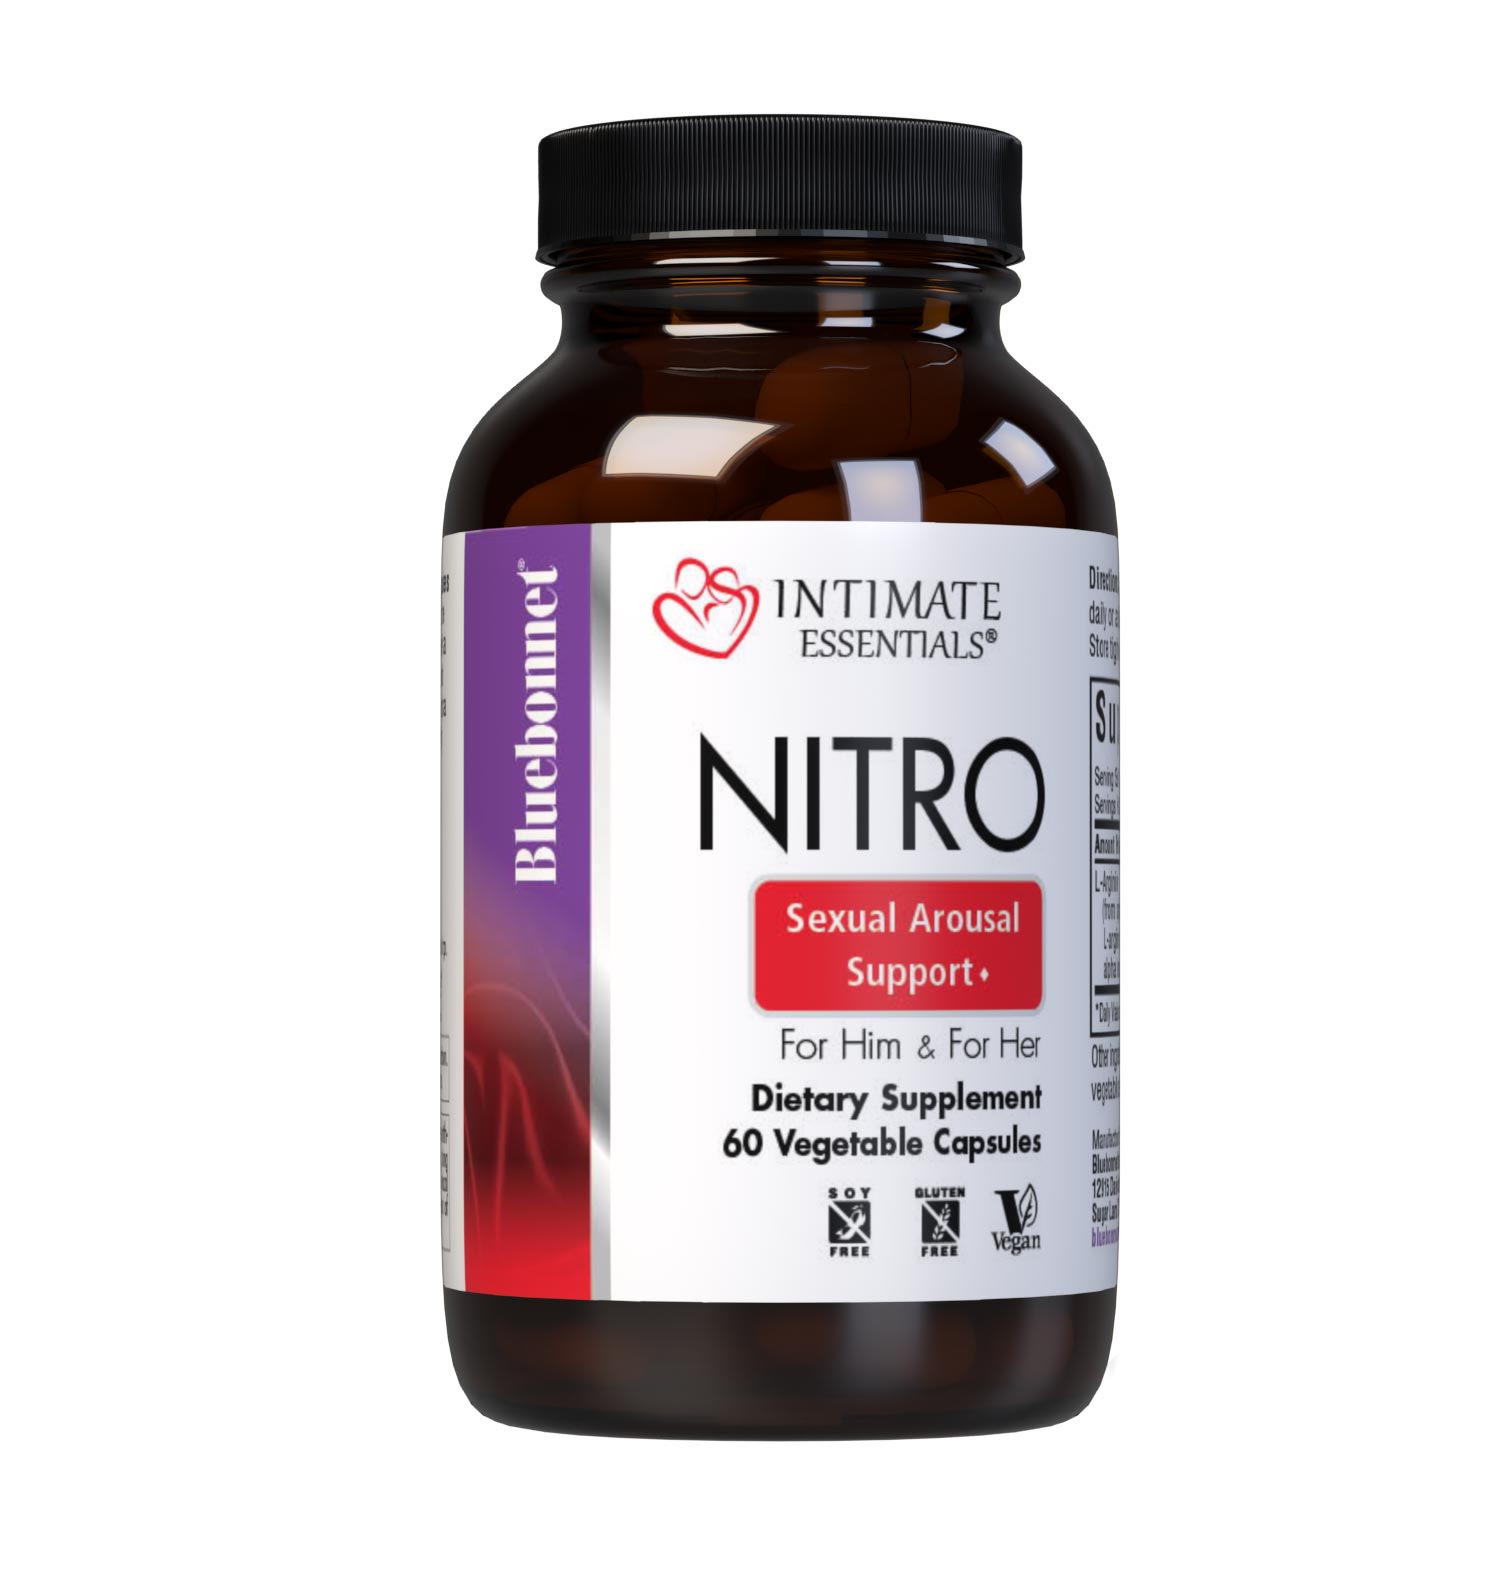 Bluebonnet’s Intimate Essentials Nitro Vegetable Capsules are formulated with the most effective arginine forms on the market, including the scientifically engineered Nitrosigine, a patented complex of bonded arginine silicate stabilized with inositol, along with free-form L-arginine and L-arginine alpha ketoglutarate to help support sexual arousal and intensify orgasm by increasing vasodilation and blood flow, as well as boosting nitric oxide (NO) levels. #size_60 count